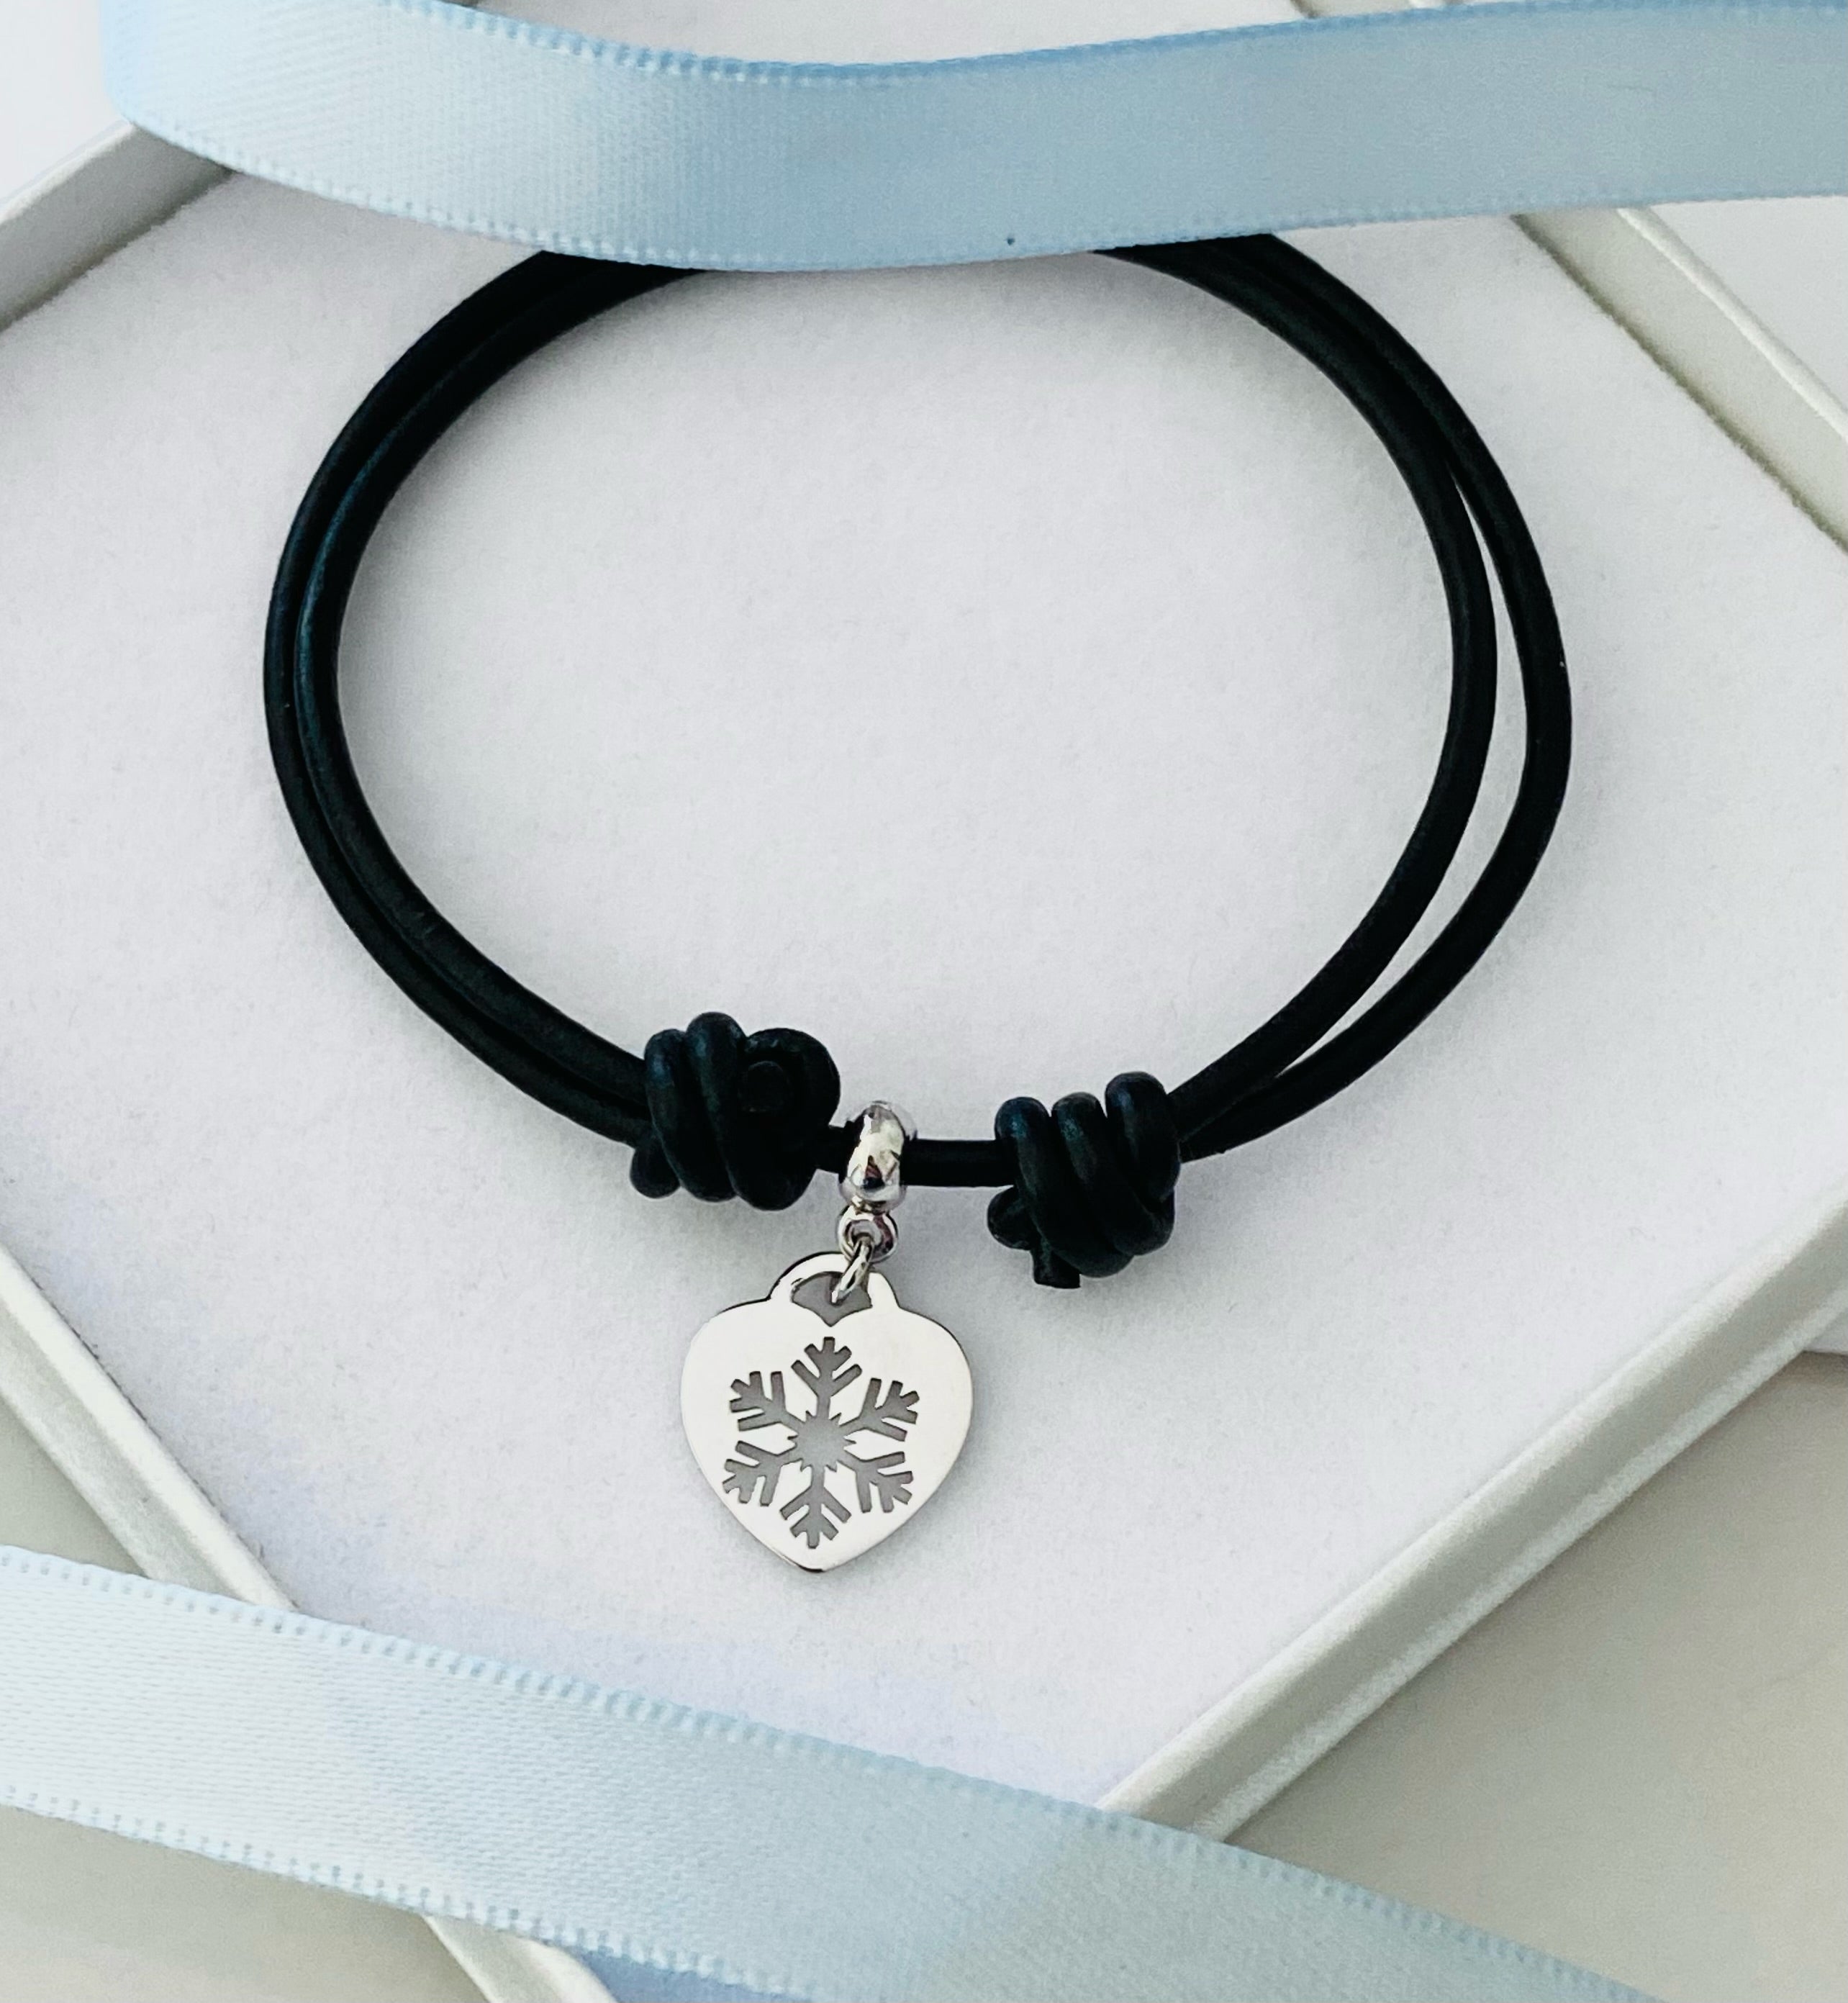 Black Leather Snowflake Bracelet with Heart Charm